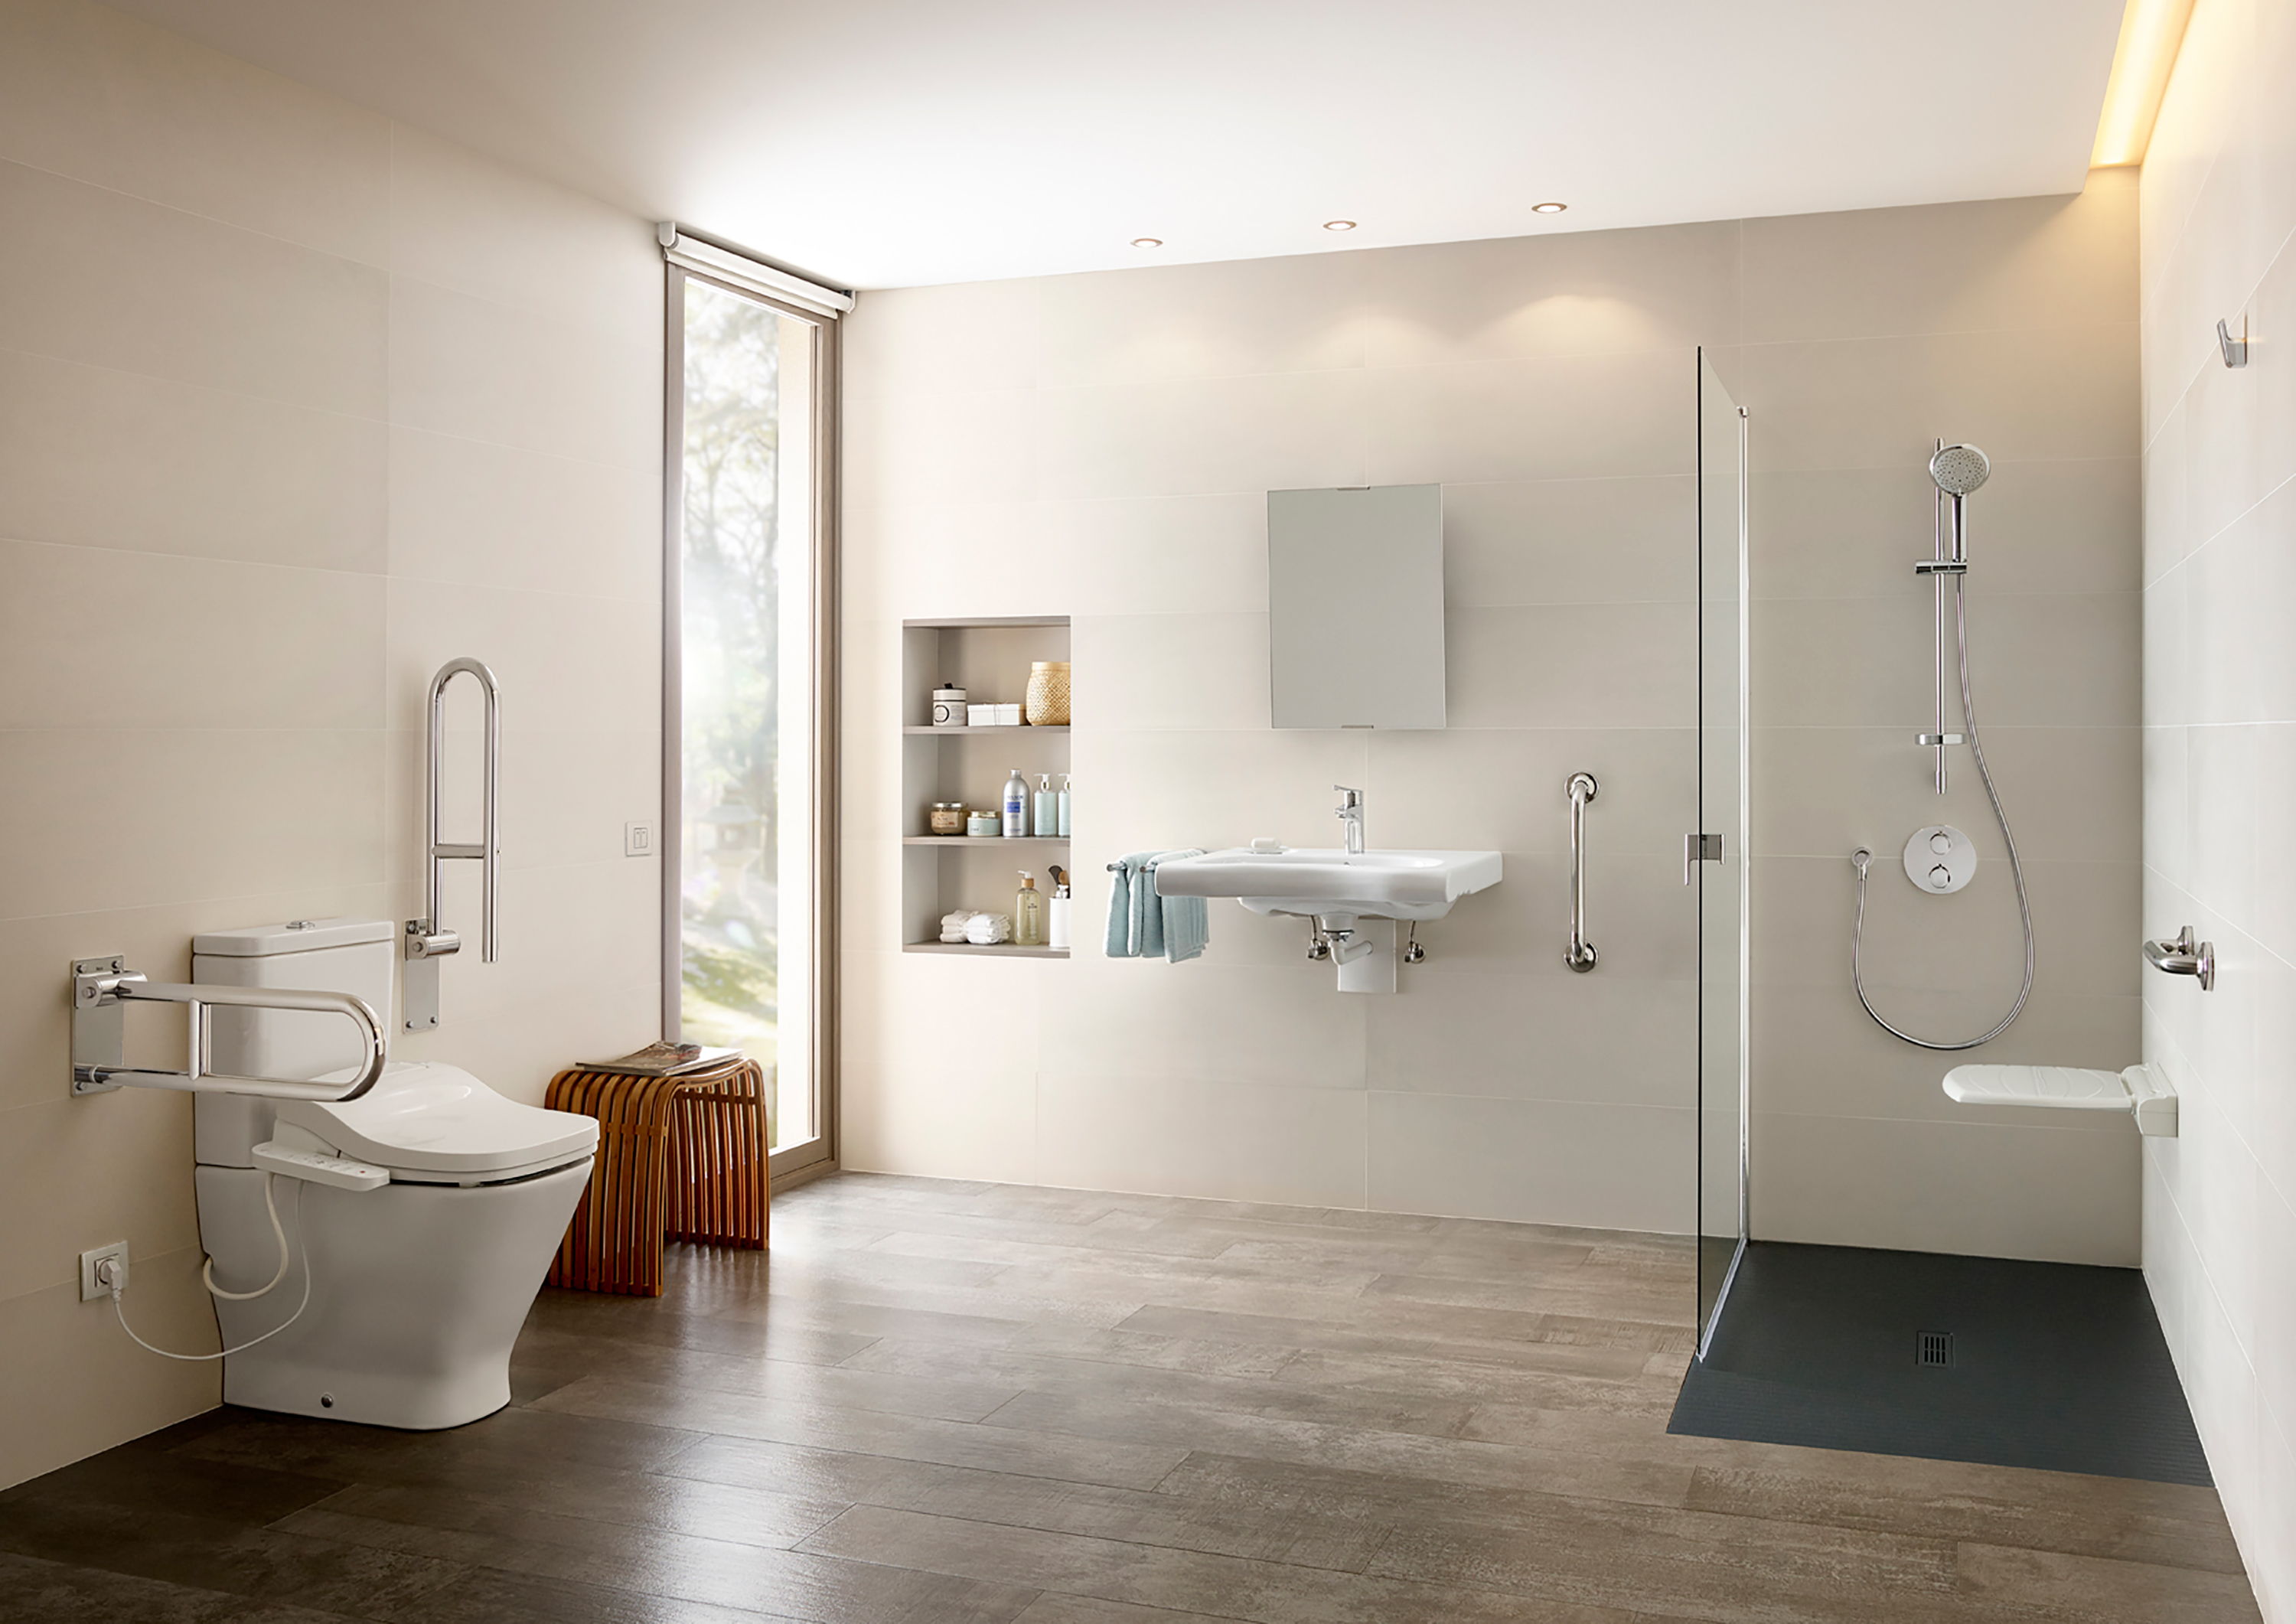 Ideas and tips for designing bathrooms for the elderly